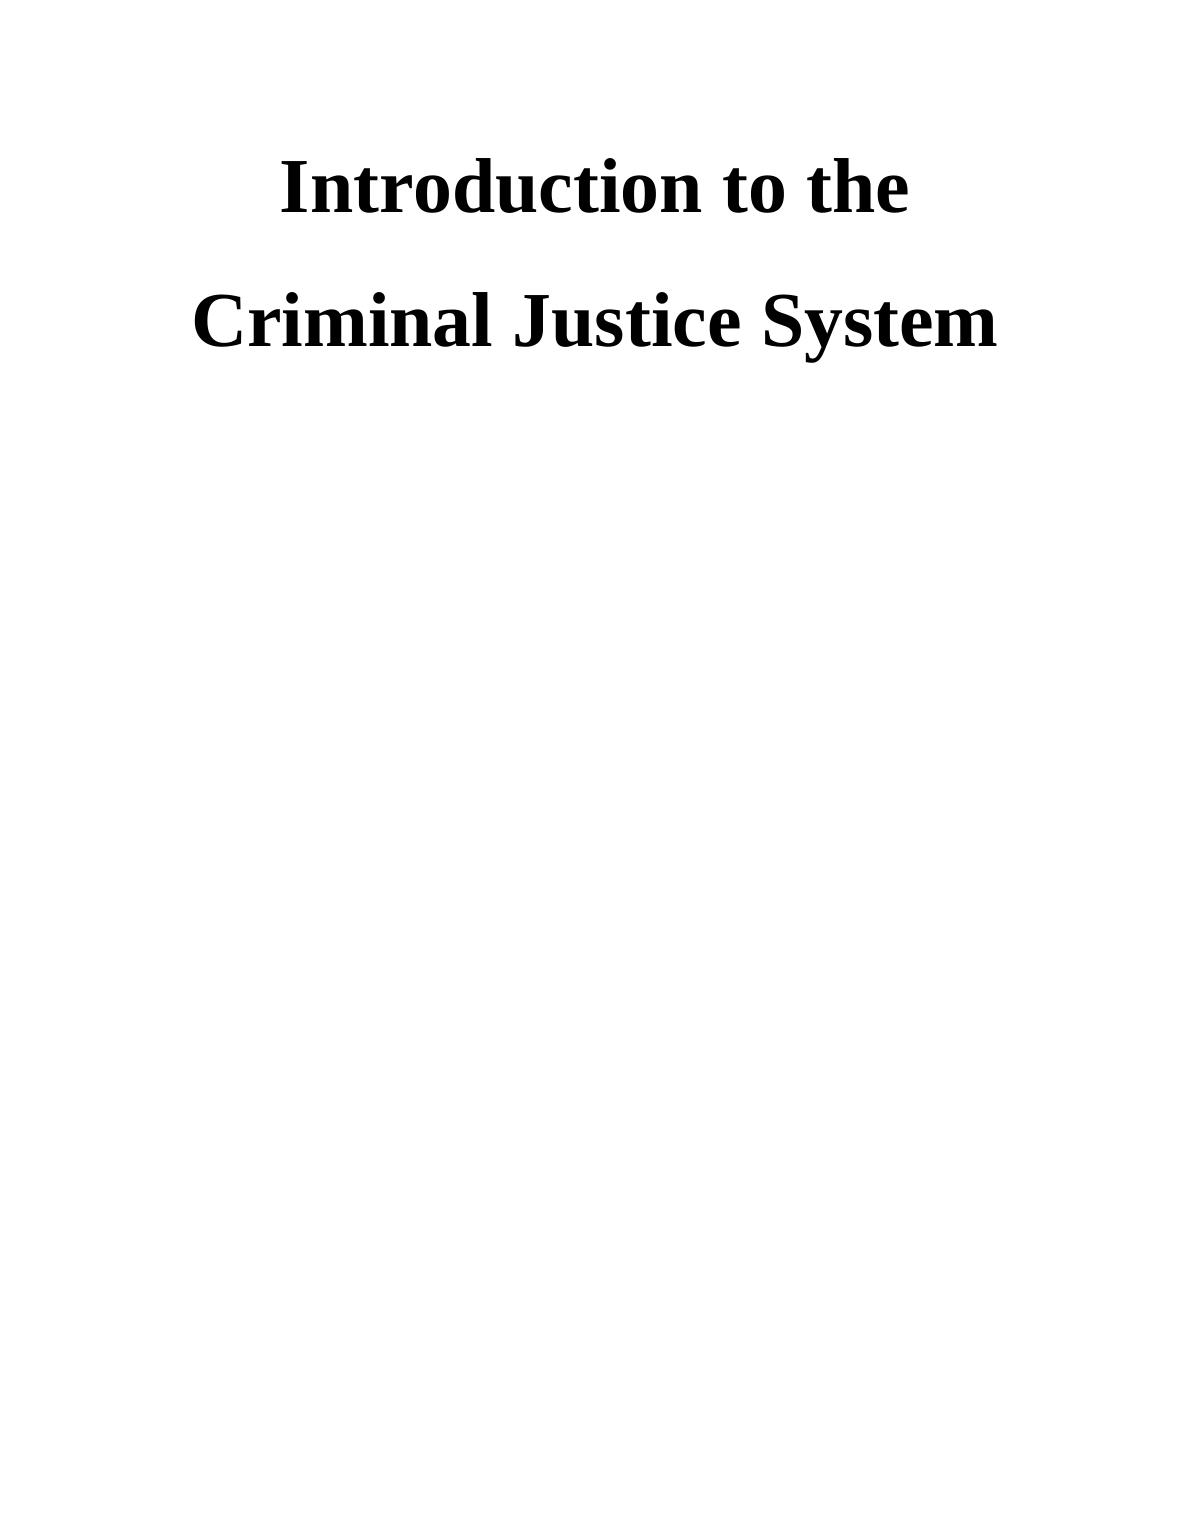 Introduction to the Criminal Justice System_1